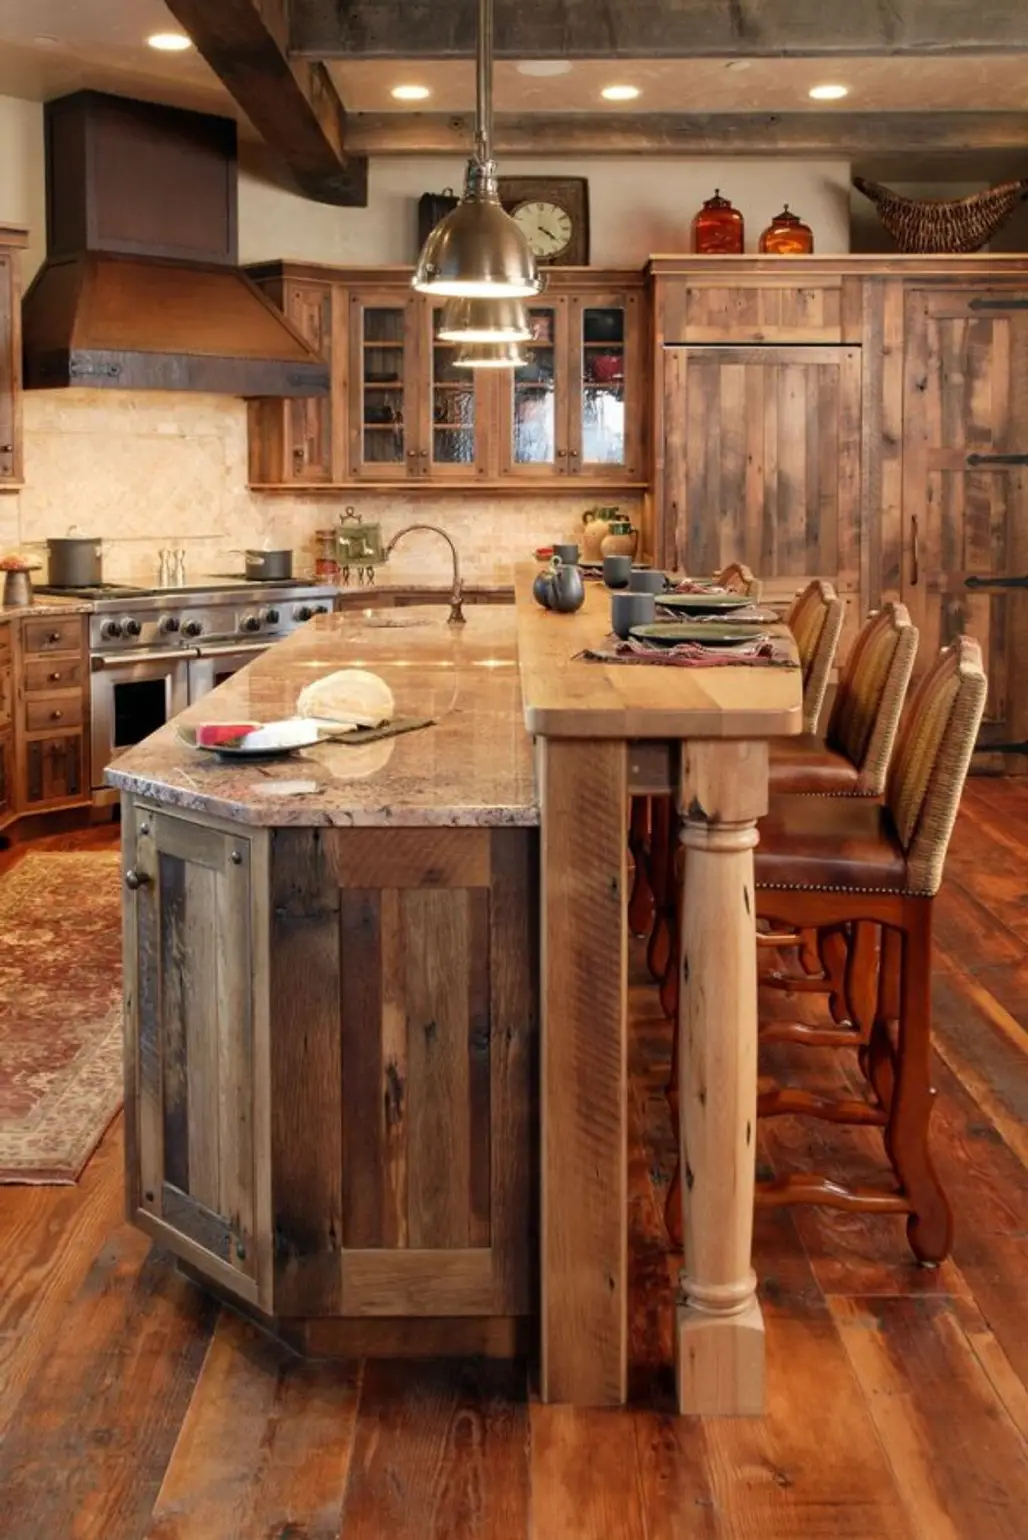 All-Natural Rustic Wood Cabinets and Floors